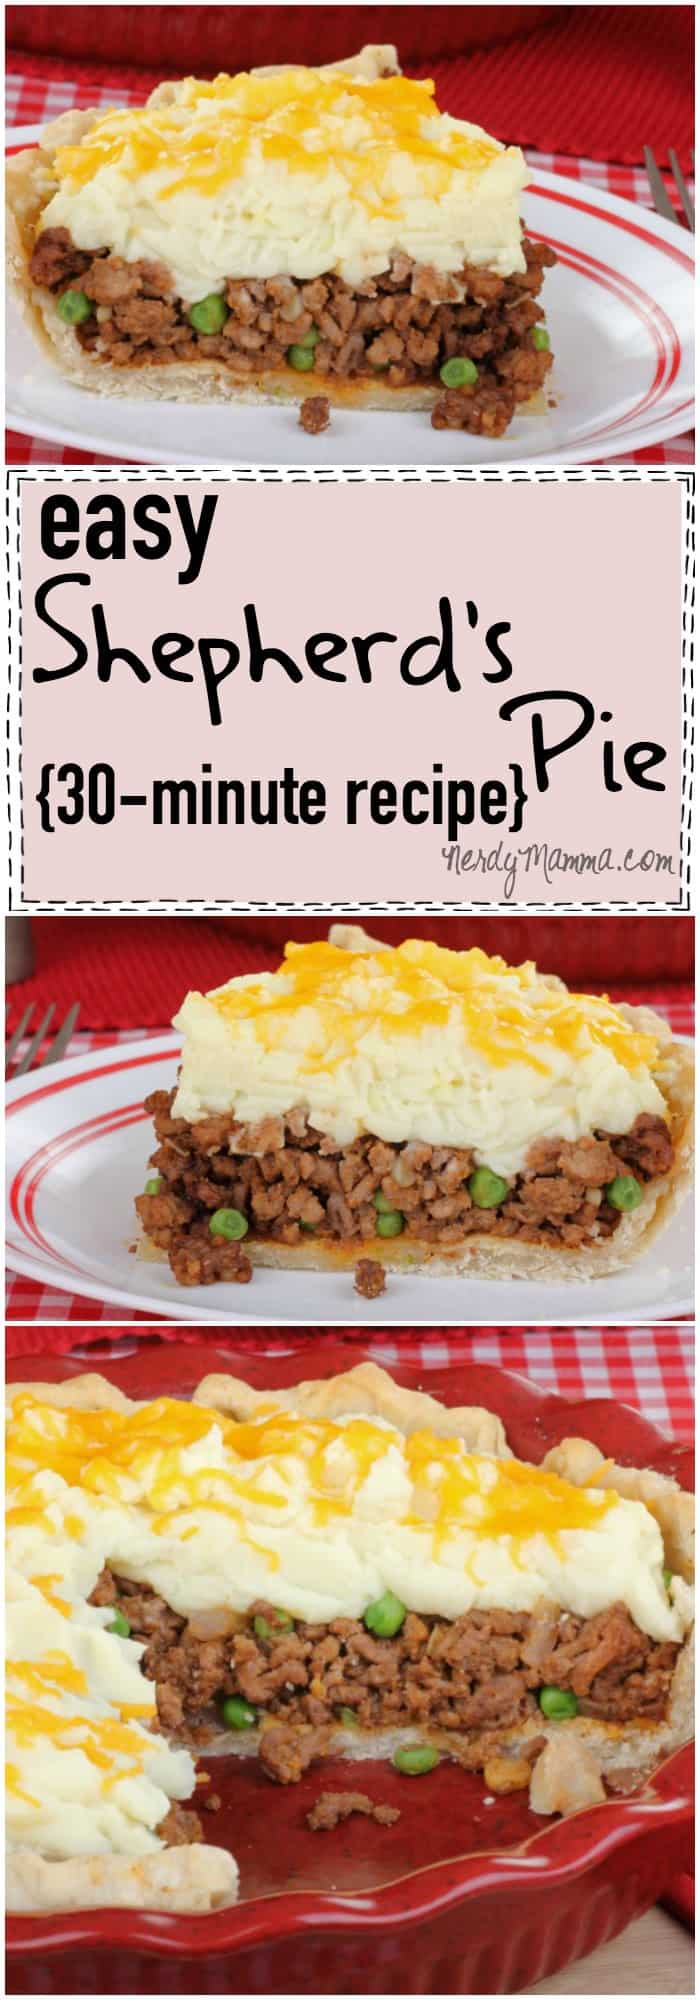 This Shepherd's Pie recipe is so easy...I didn't realize it could be put together this fast. Love it!